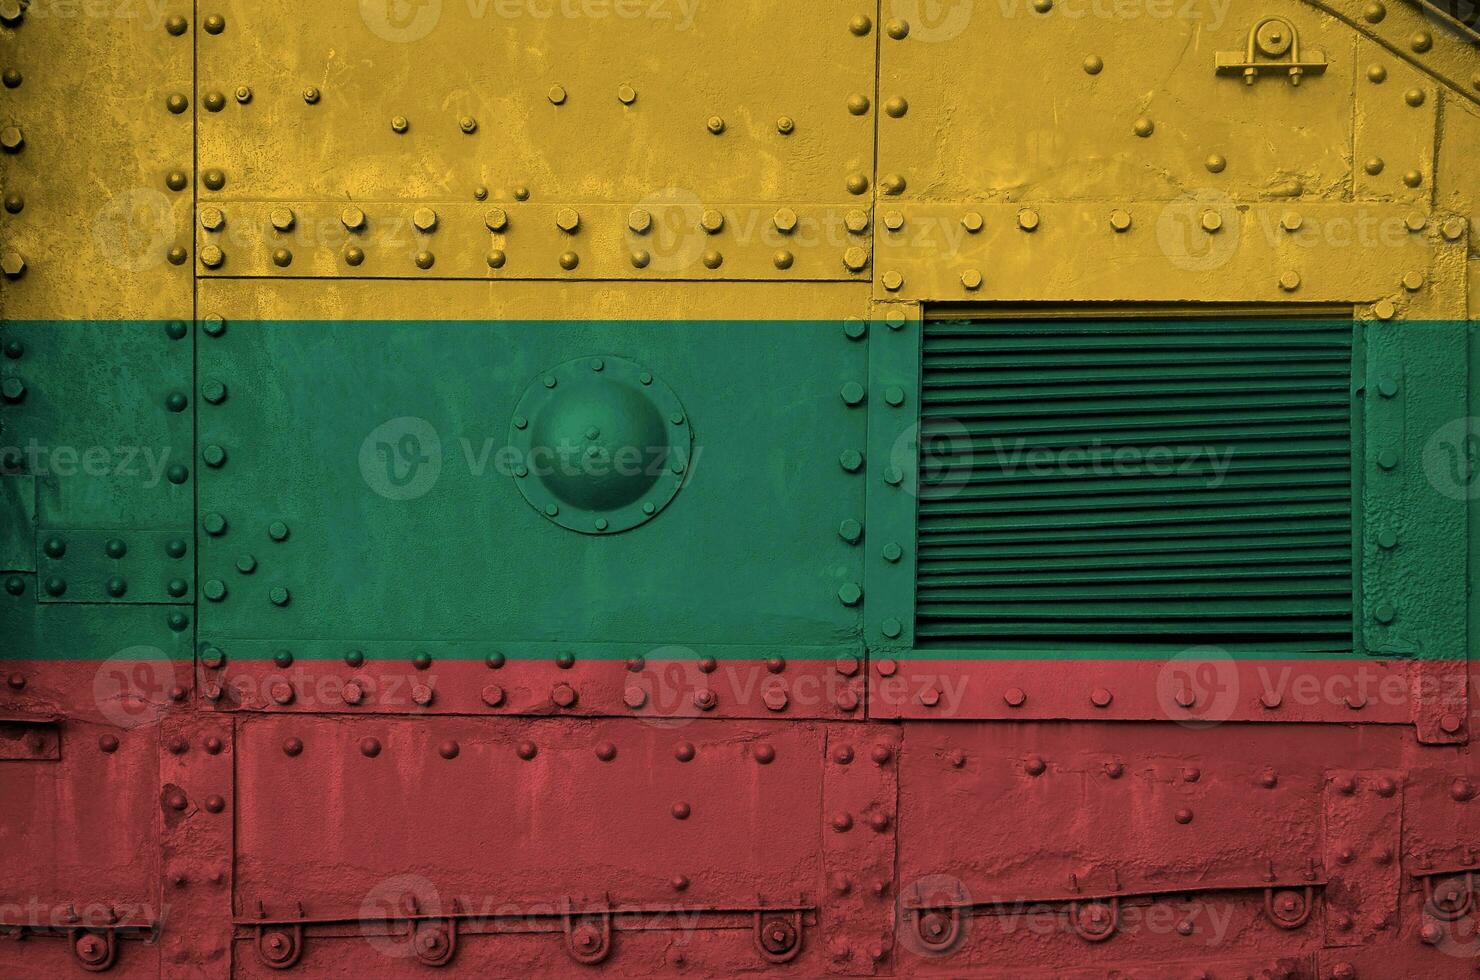 Lithuania flag depicted on side part of military armored tank closeup. Army forces conceptual background photo